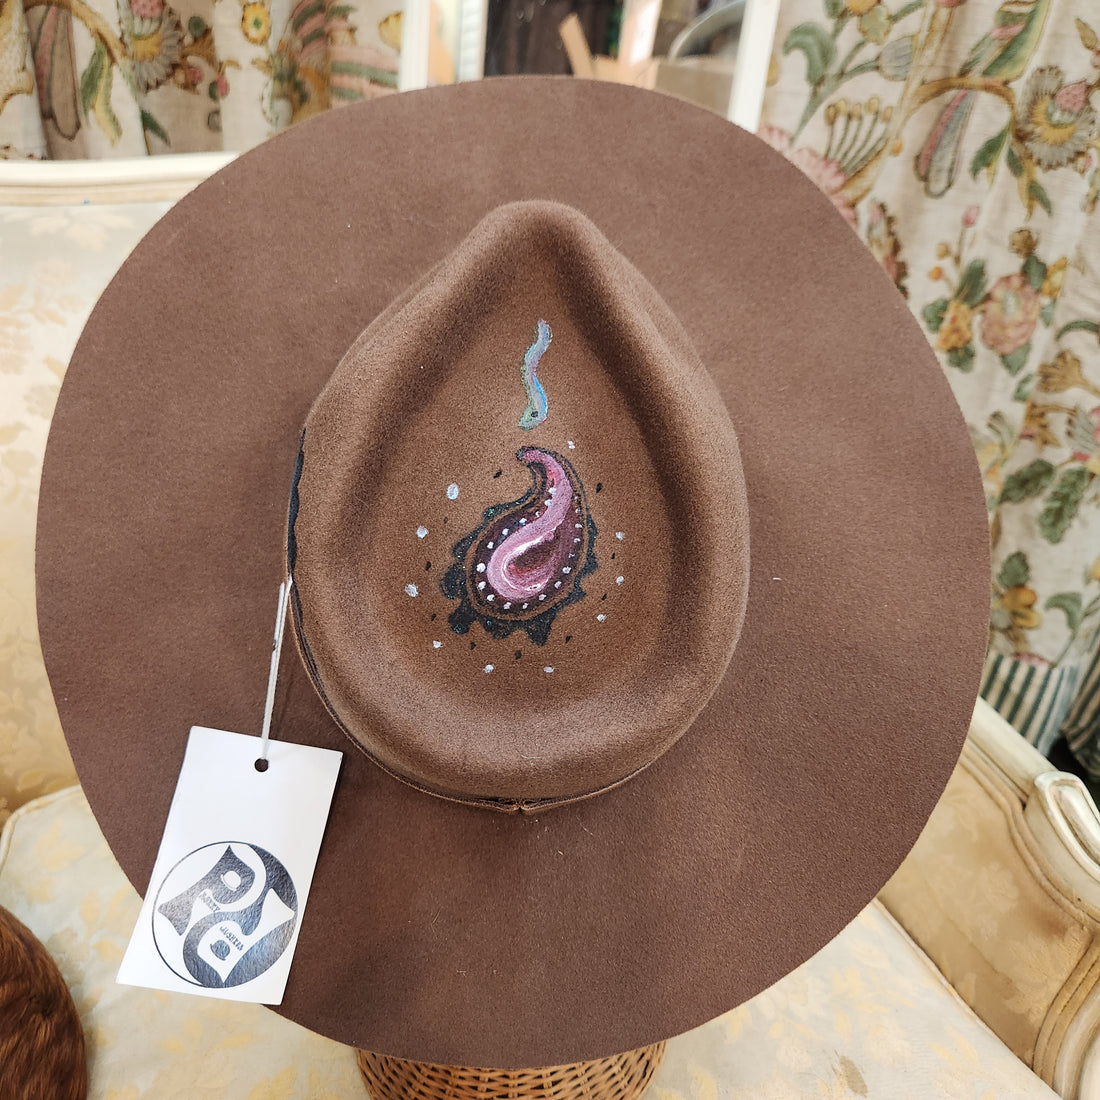 A brown Mens Bowler hat fashion been displayed